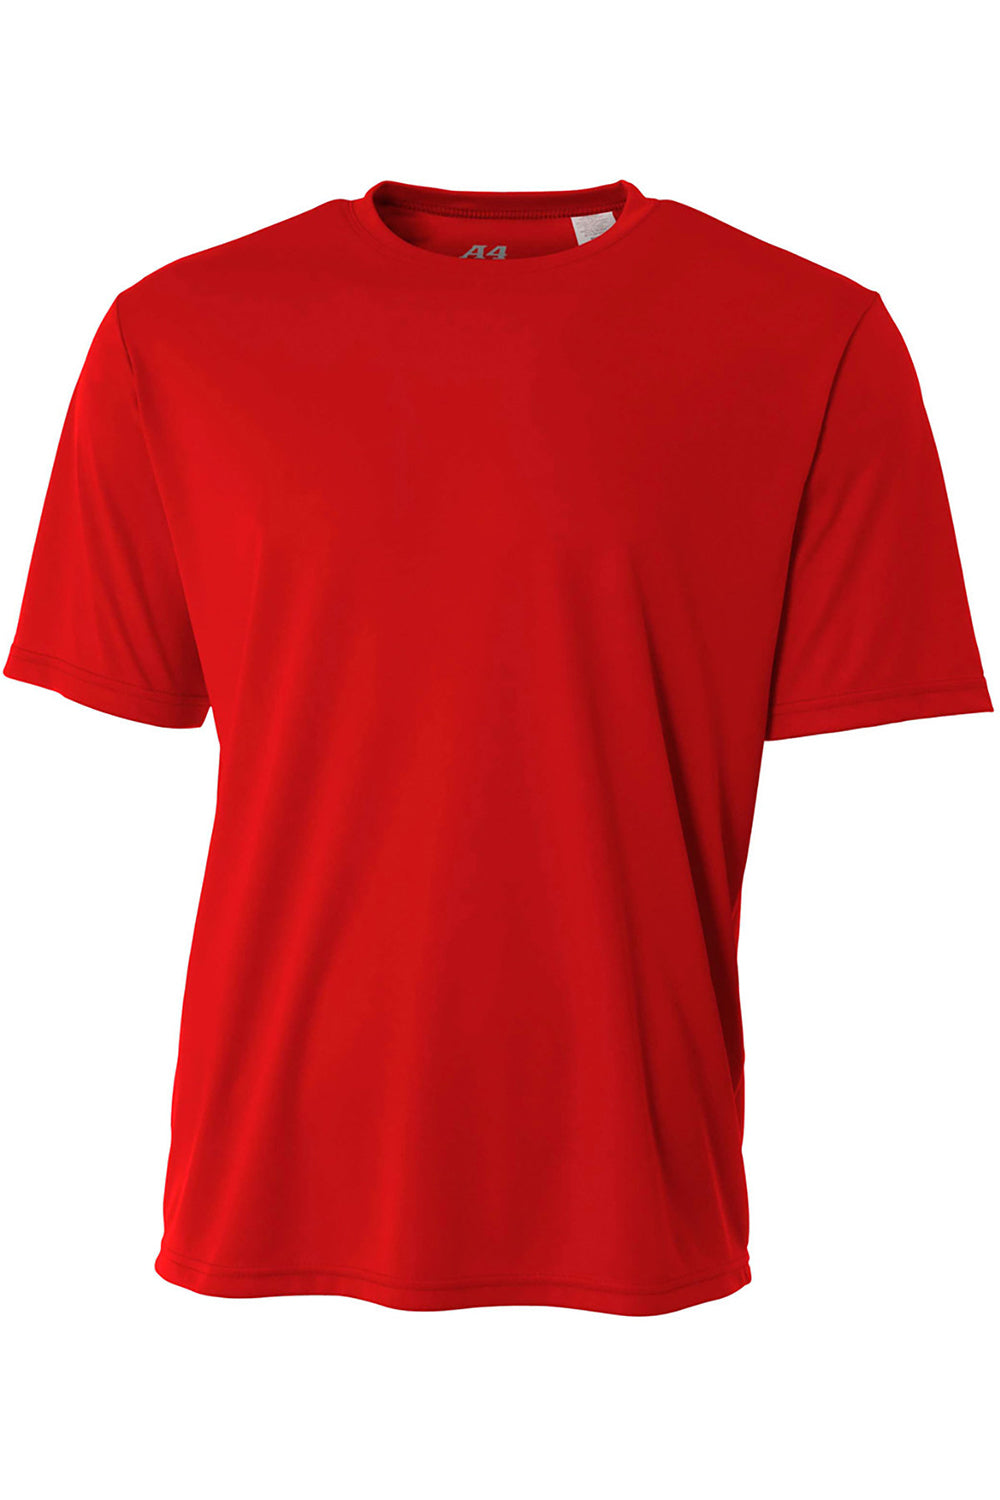 A4 NB3142 Youth Performance Moisture Wicking Short Sleeve Crewneck T-Shirt Scarlet Red Flat Front